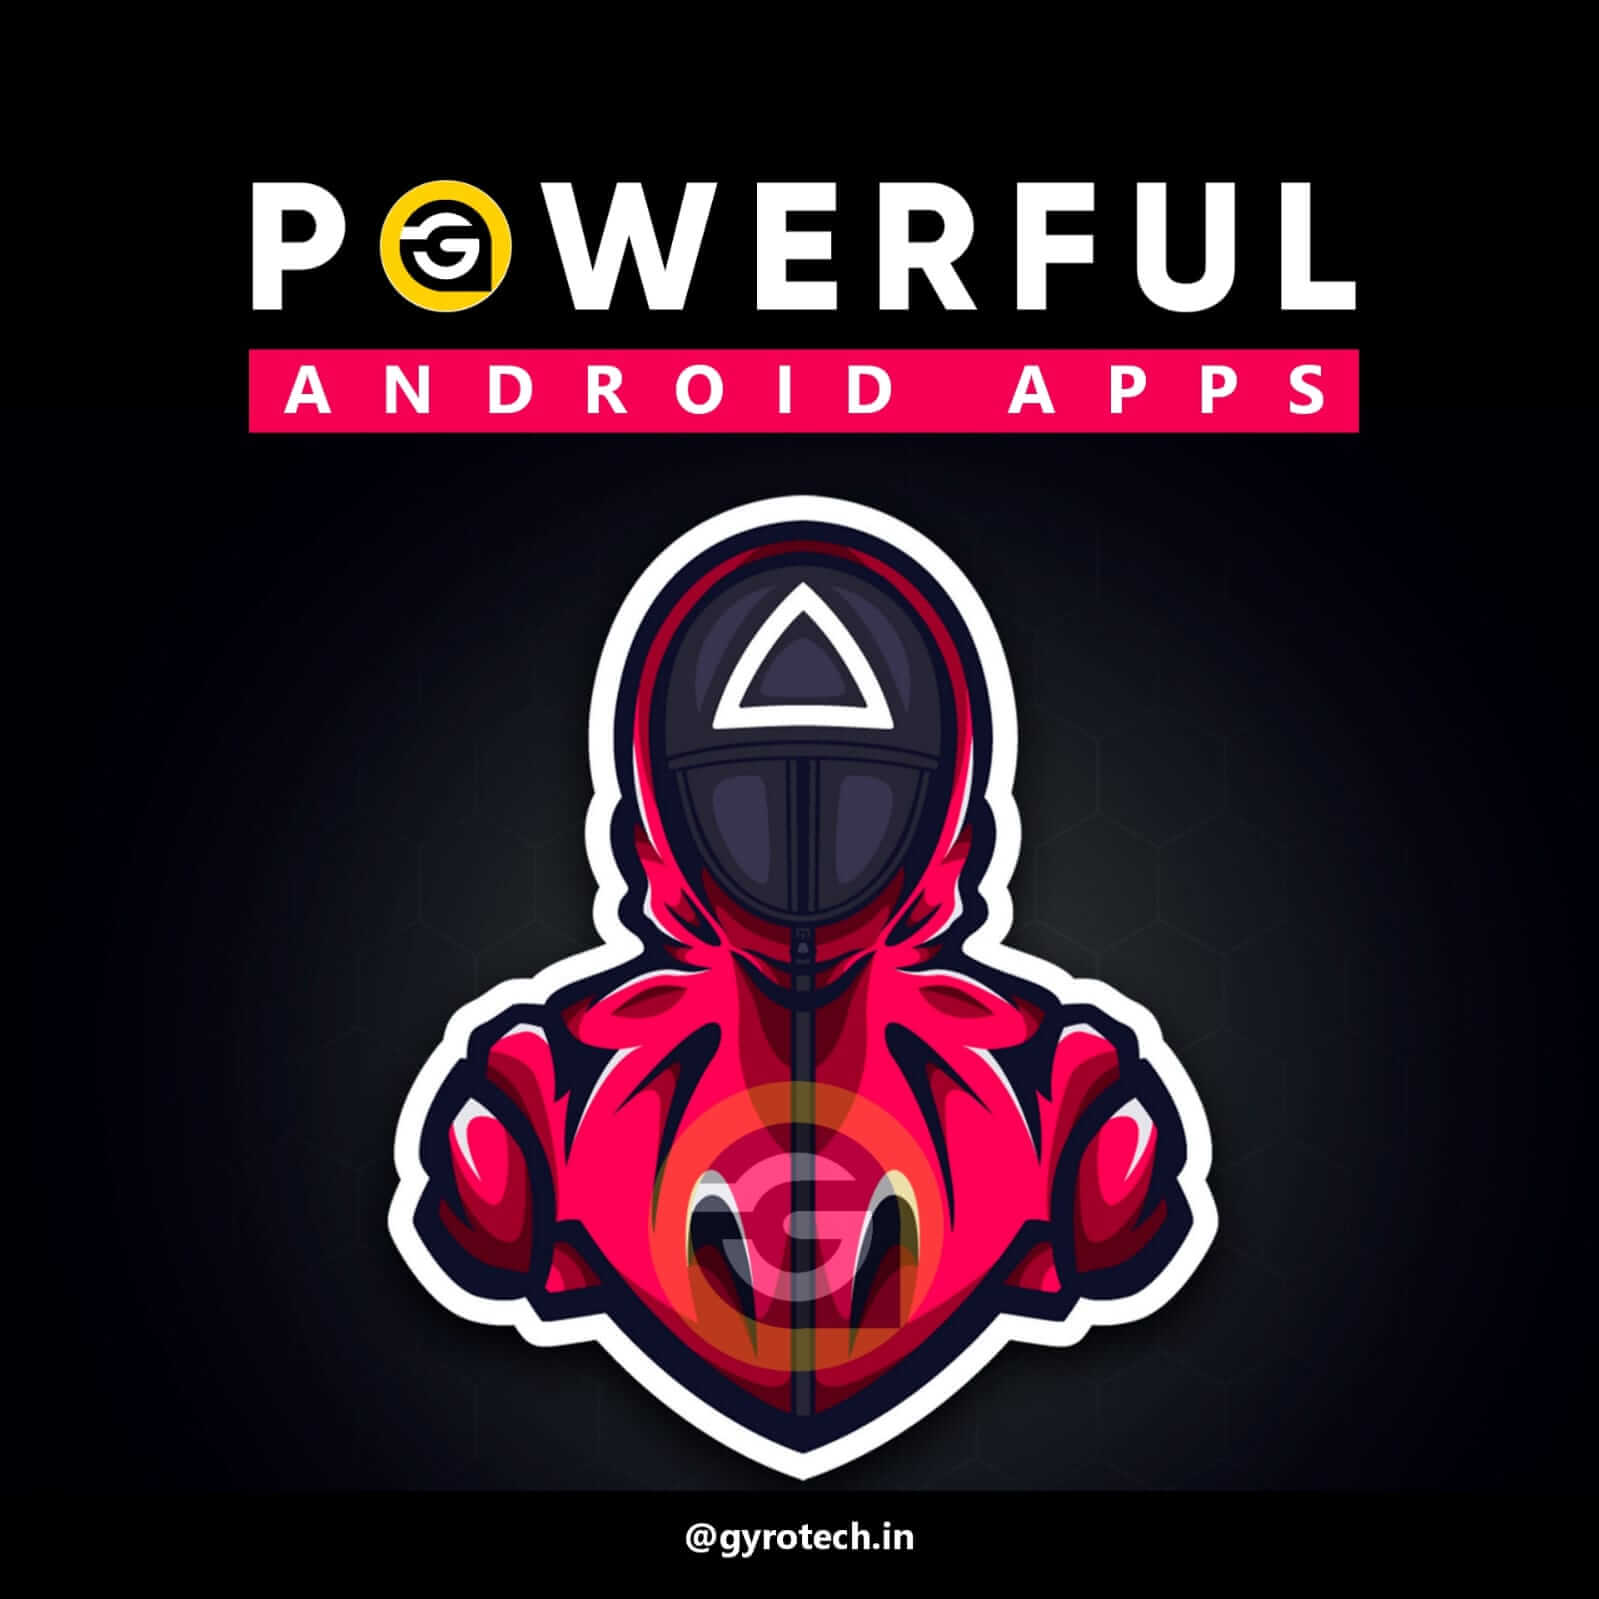 Top 5 Powerful Android Apps